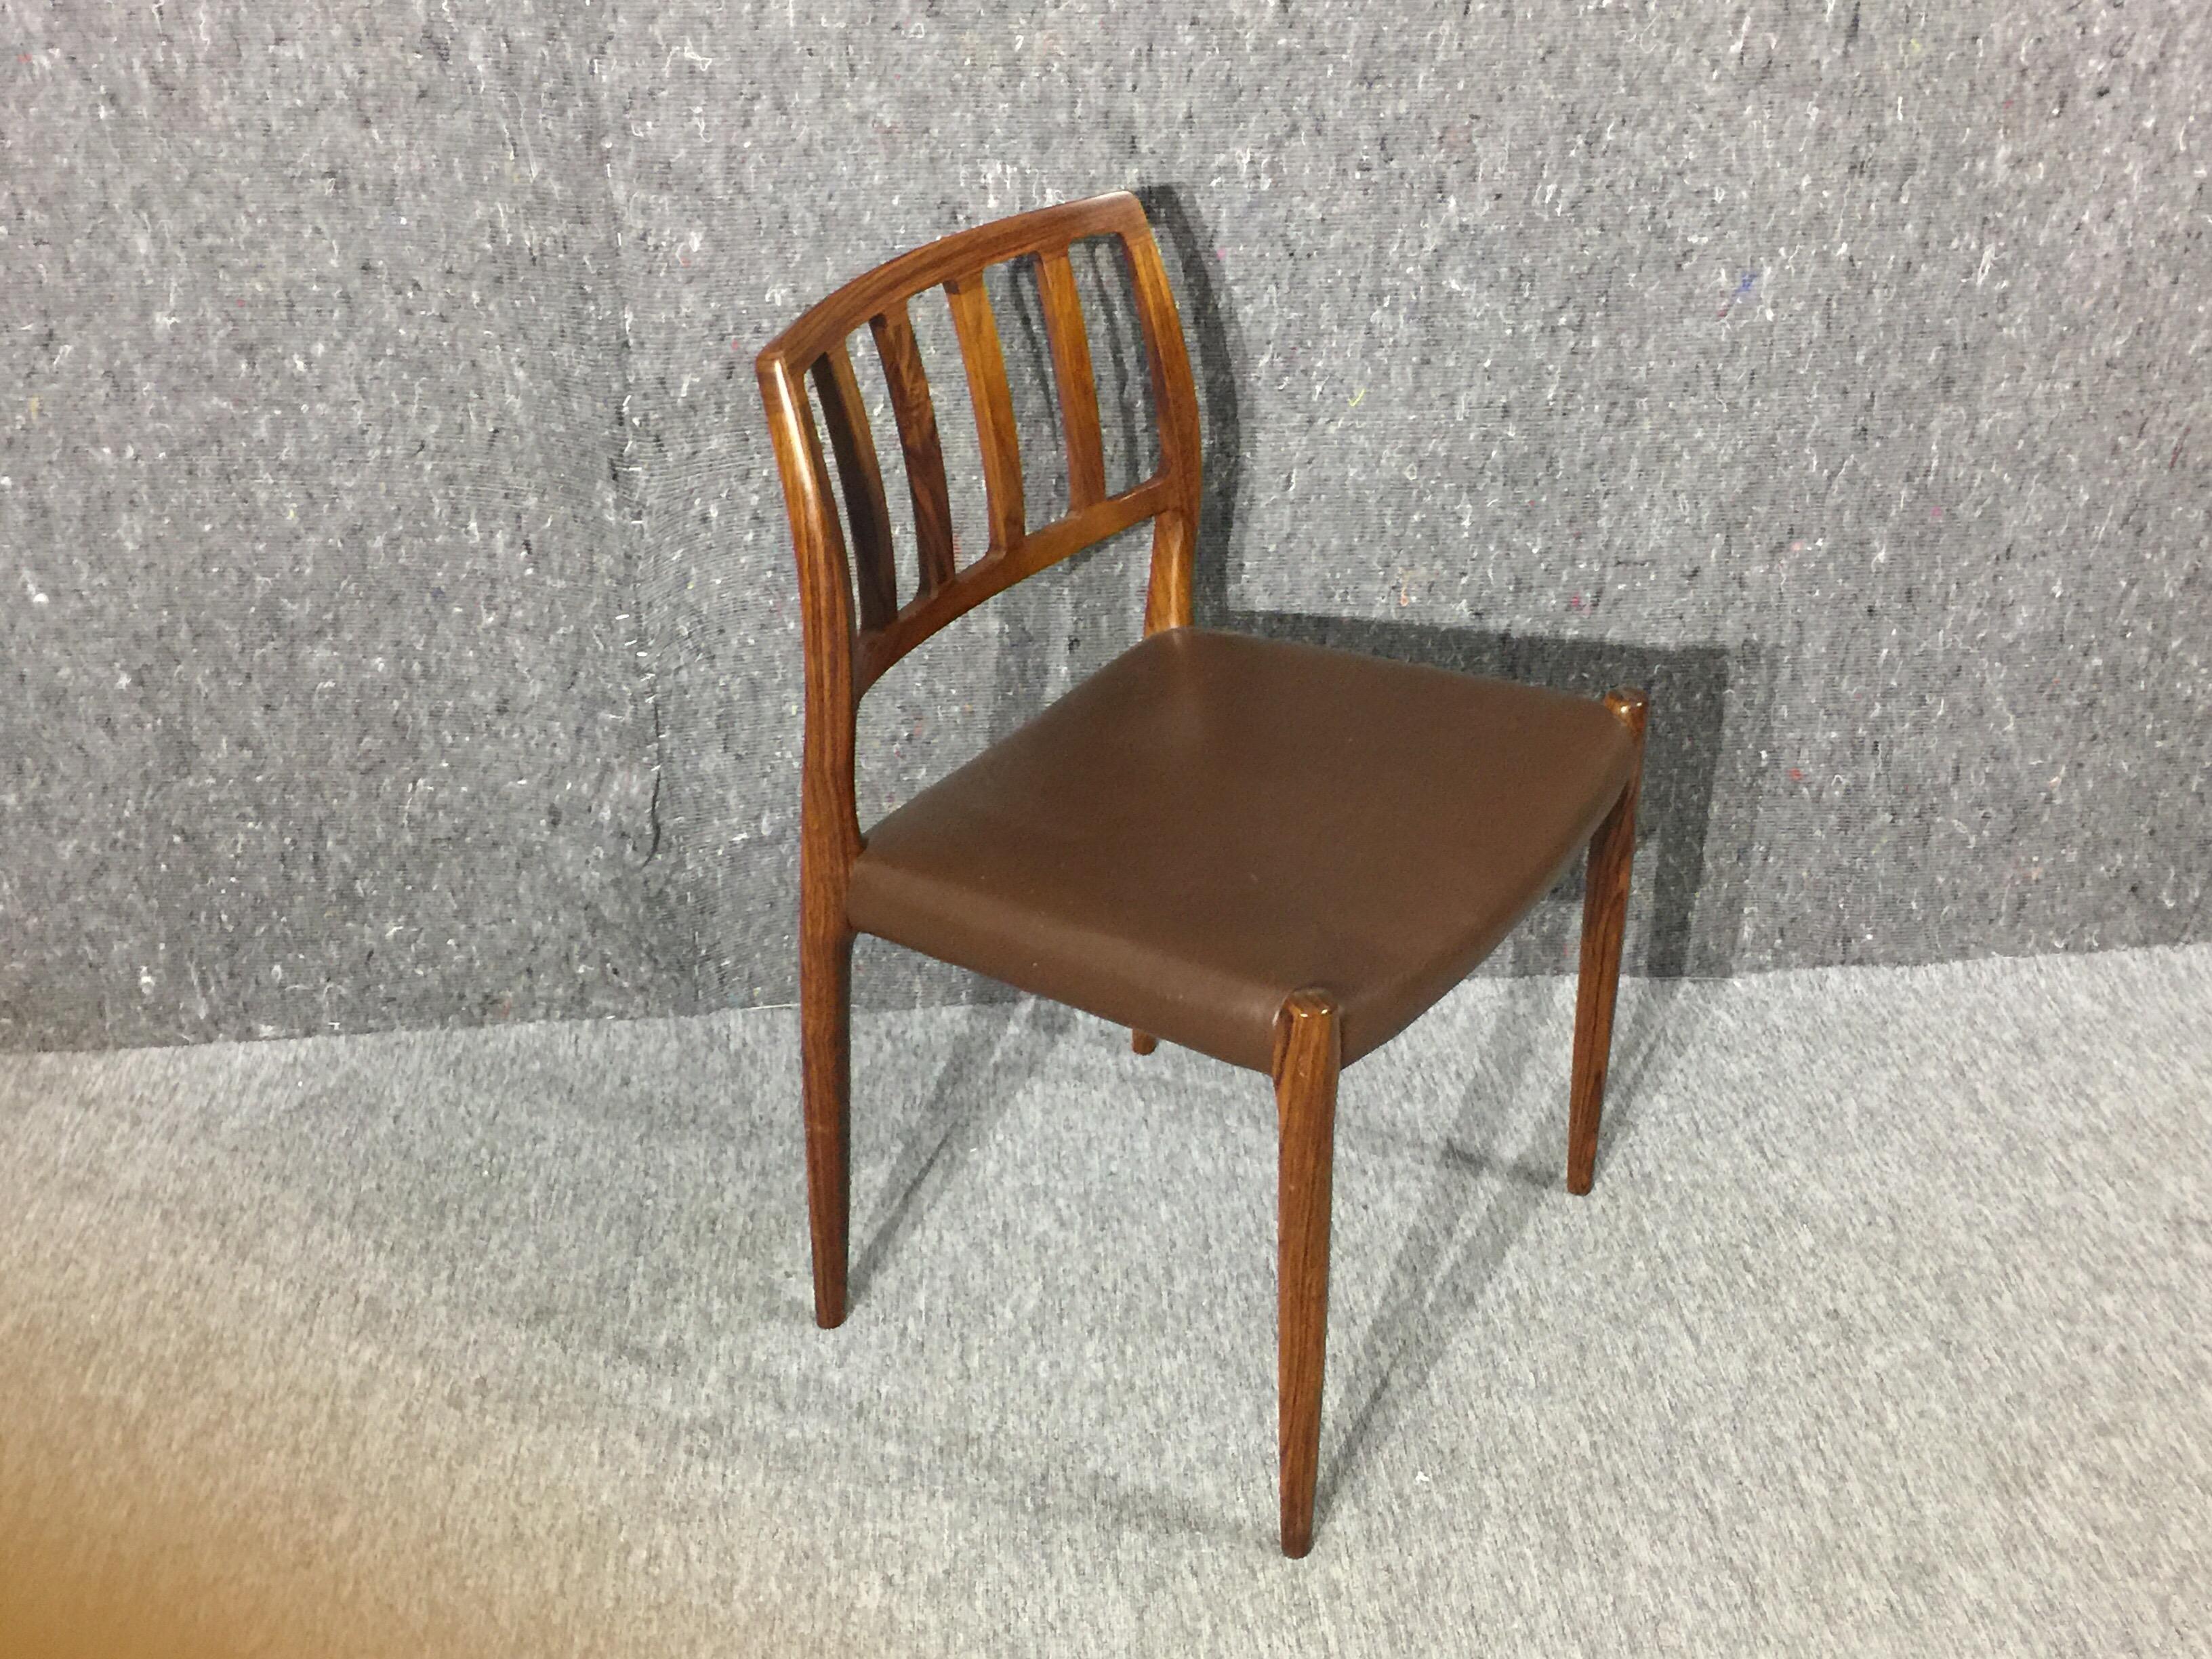 Niels Otto Møller Model 83 Rosewood, 1960s, Danish Midcentury In Excellent Condition For Sale In Odense, DK